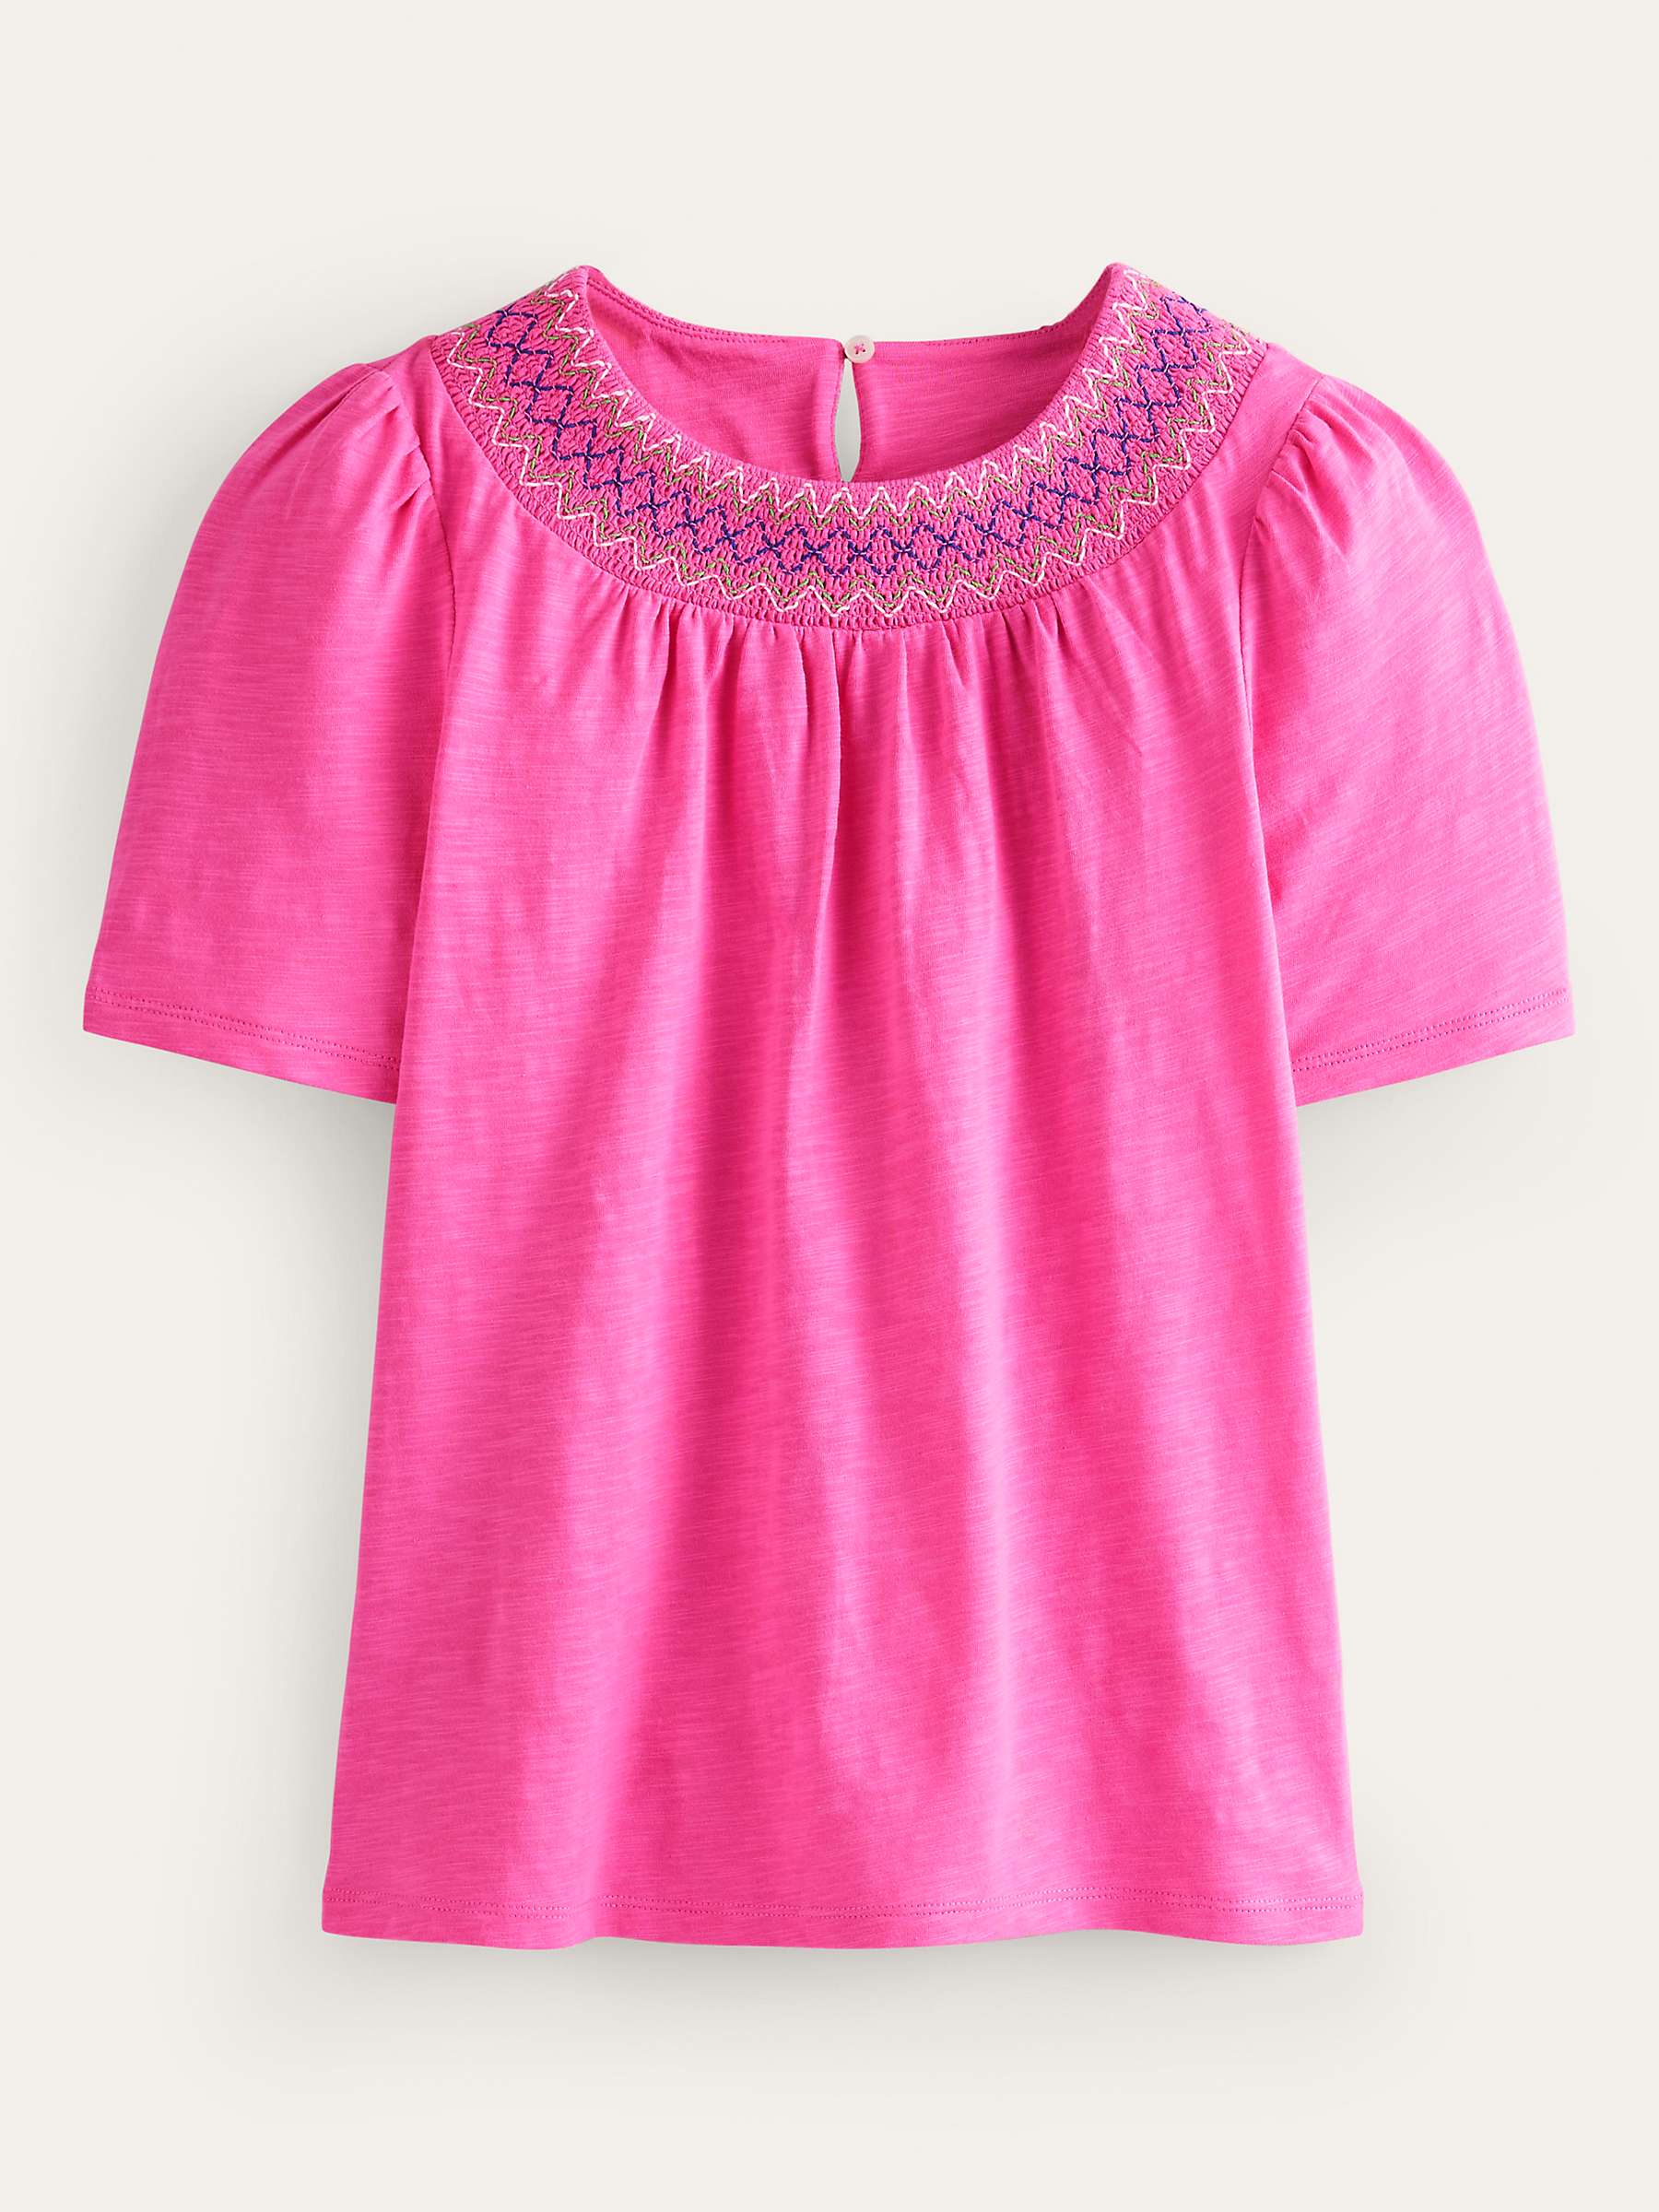 Buy Boden Puff Sleeve Top, Sangria Sunset Online at johnlewis.com